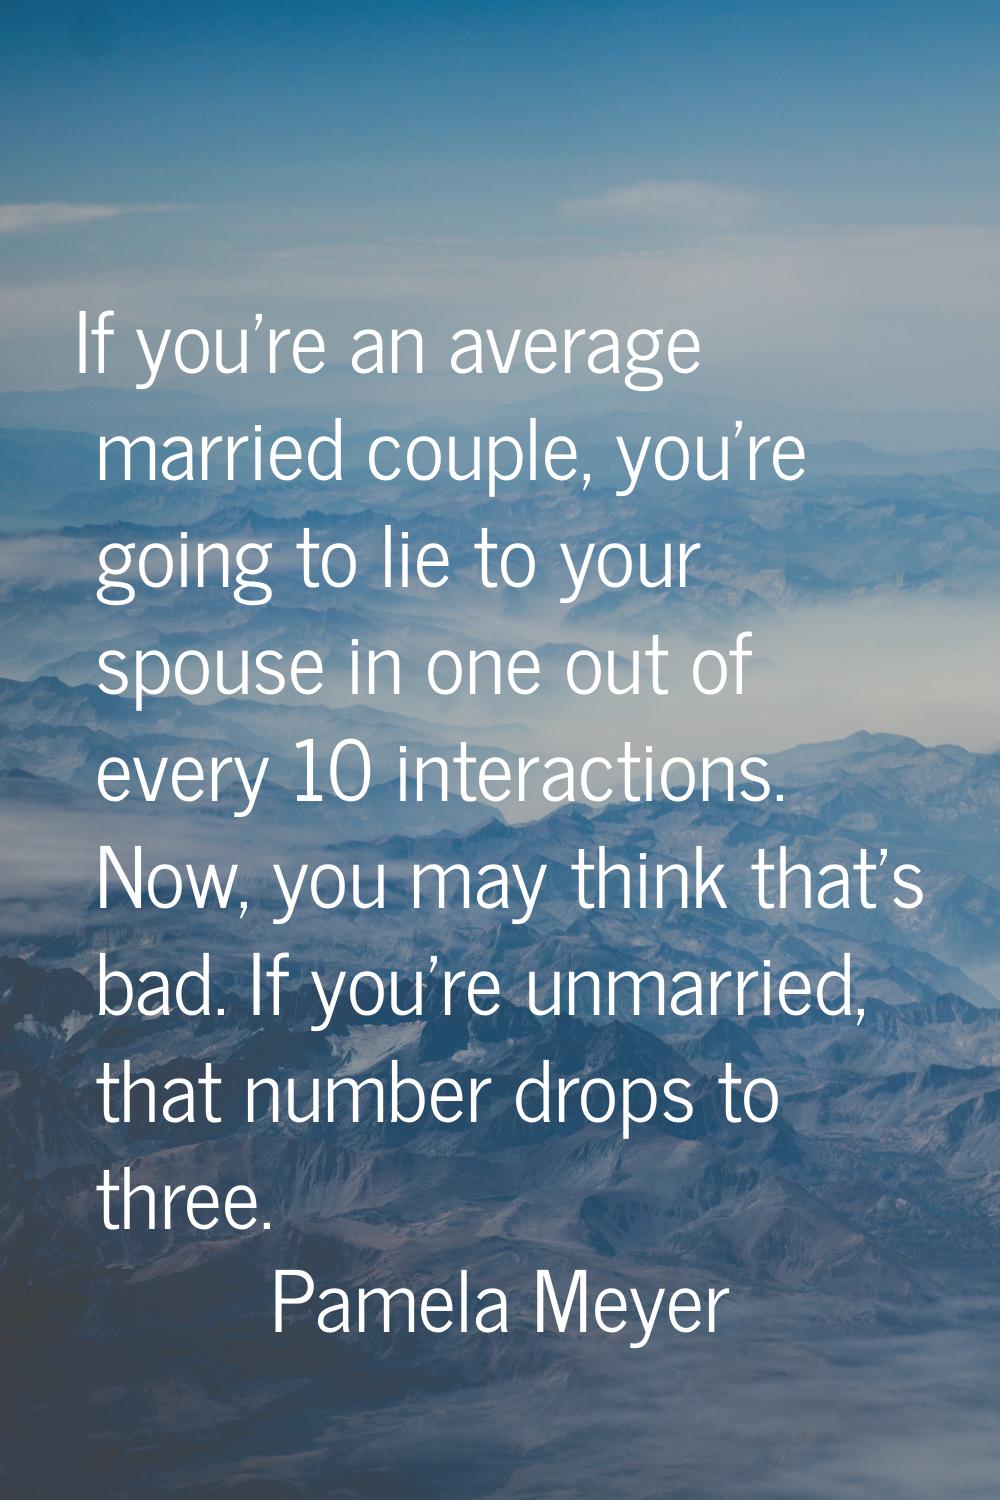 If you're an average married couple, you're going to lie to your spouse in one out of every 10 inte